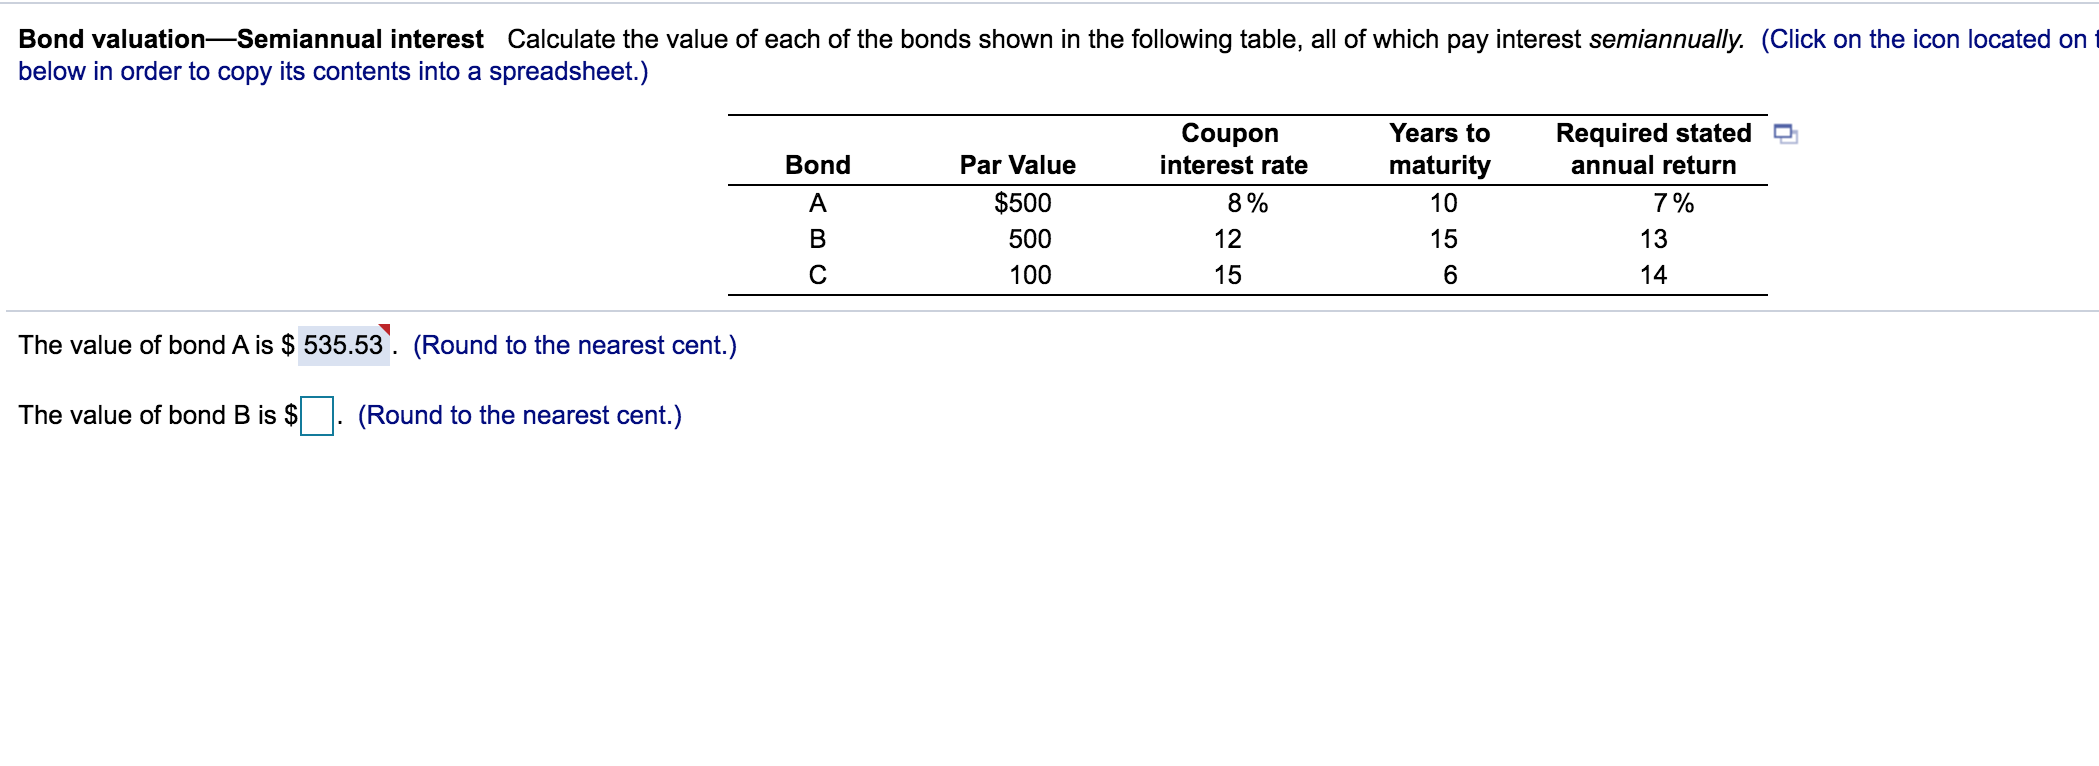 Bond valuation-Semiannual interest Calculate the value of each of the bonds shown in the following table, all of which pay interest semiannually.
below in order to copy its contents into a spreadsheet.)
Required stated
annual return
Years to
Coupon
interest rate
Bond
Par Value
maturity
A
$500
8%
10
7%
500
12
15
13
C
100
15
6.
14
The value of bond A is $ 535.53'. (Round to the nearest cent.)
The value of bond B is $
(Round to the nearest cent.)
